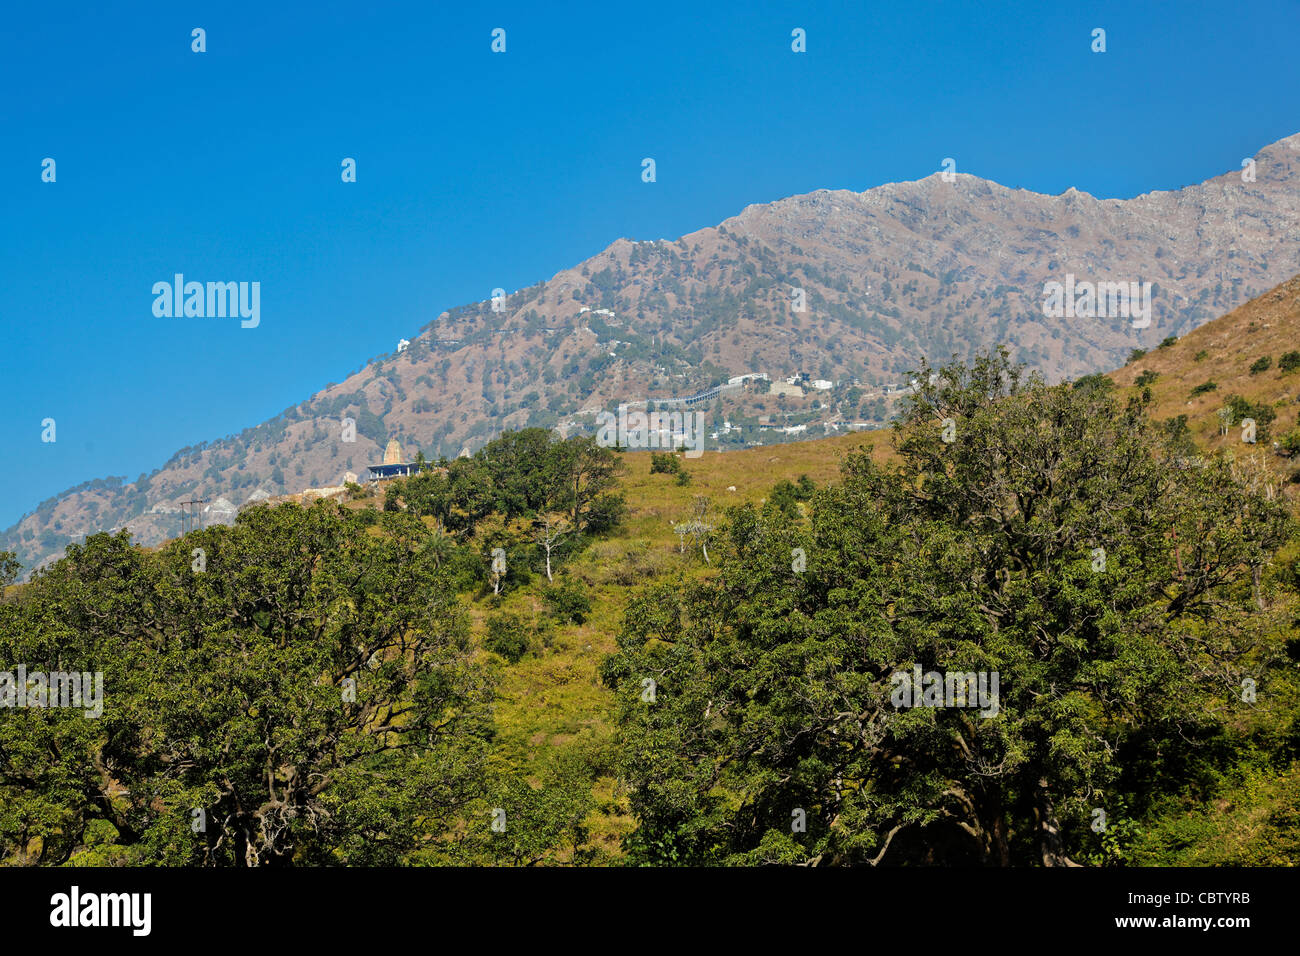 Landscape of Vaishno Devi mountain the Trikuta peak from the heliport at Katra, Himalayas copy space with crop margins Stock Photo